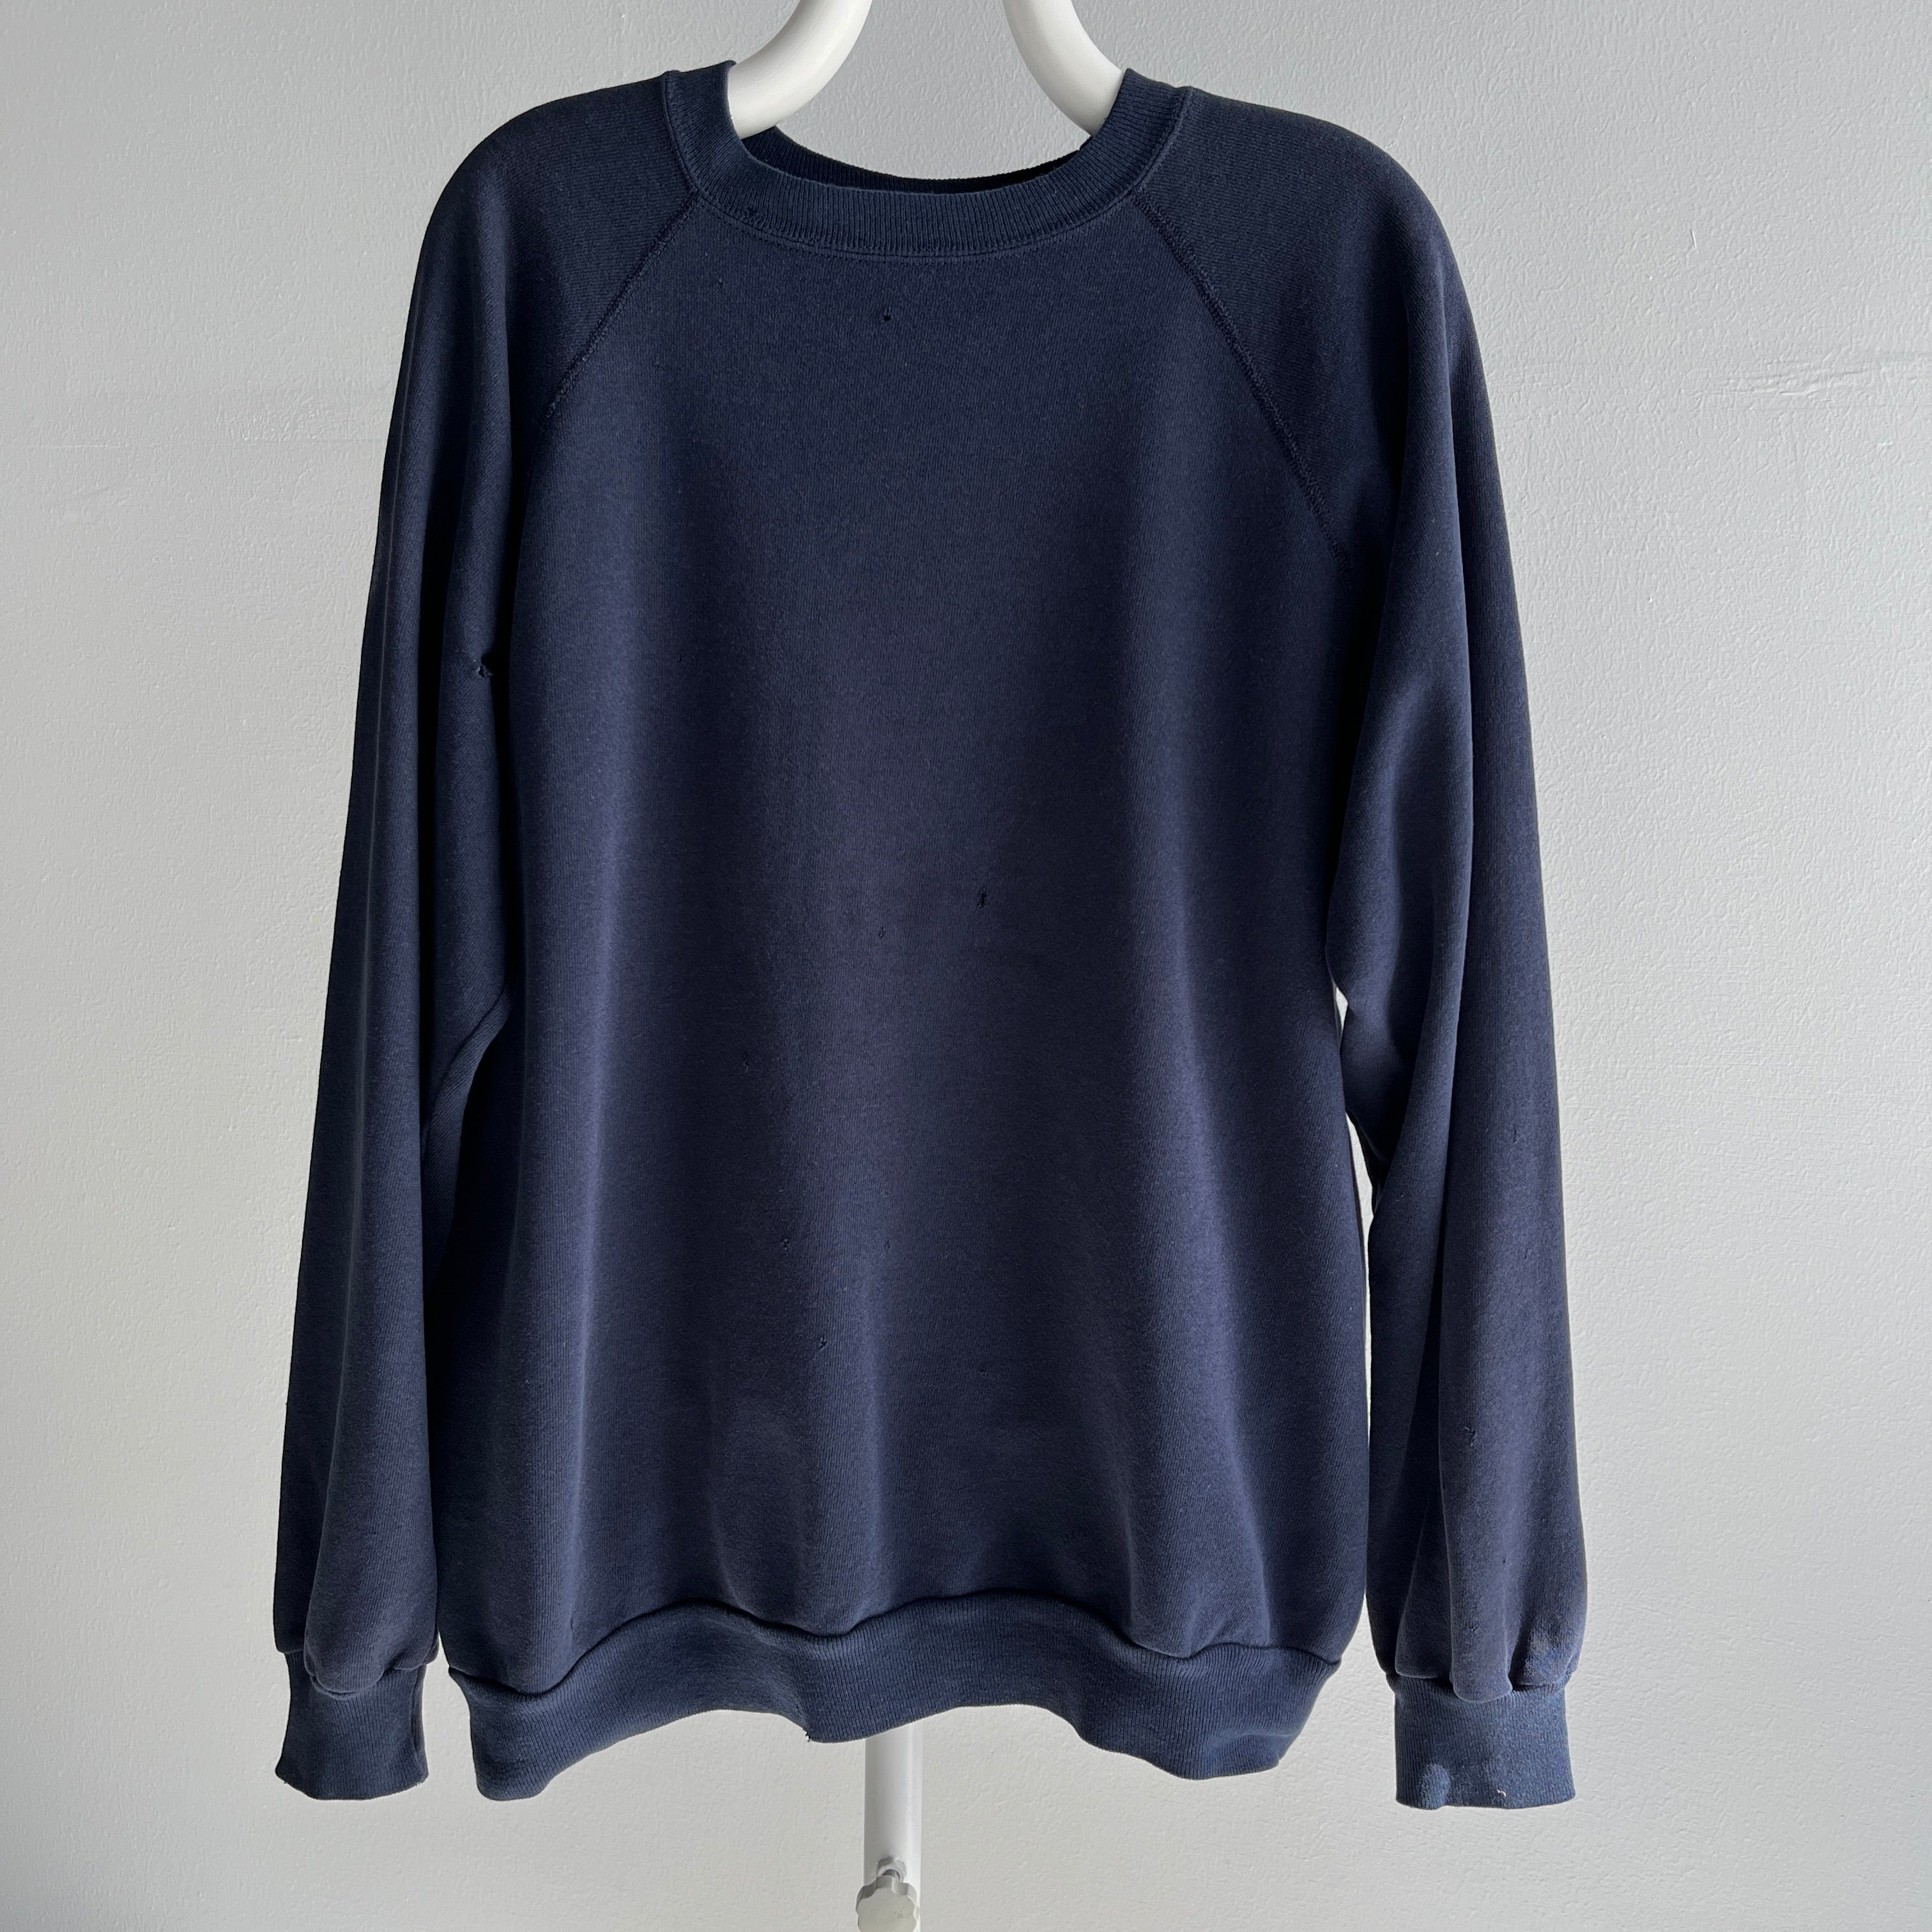 1980s Faded and Thrashed Larger Blank Navy Sweatshirt